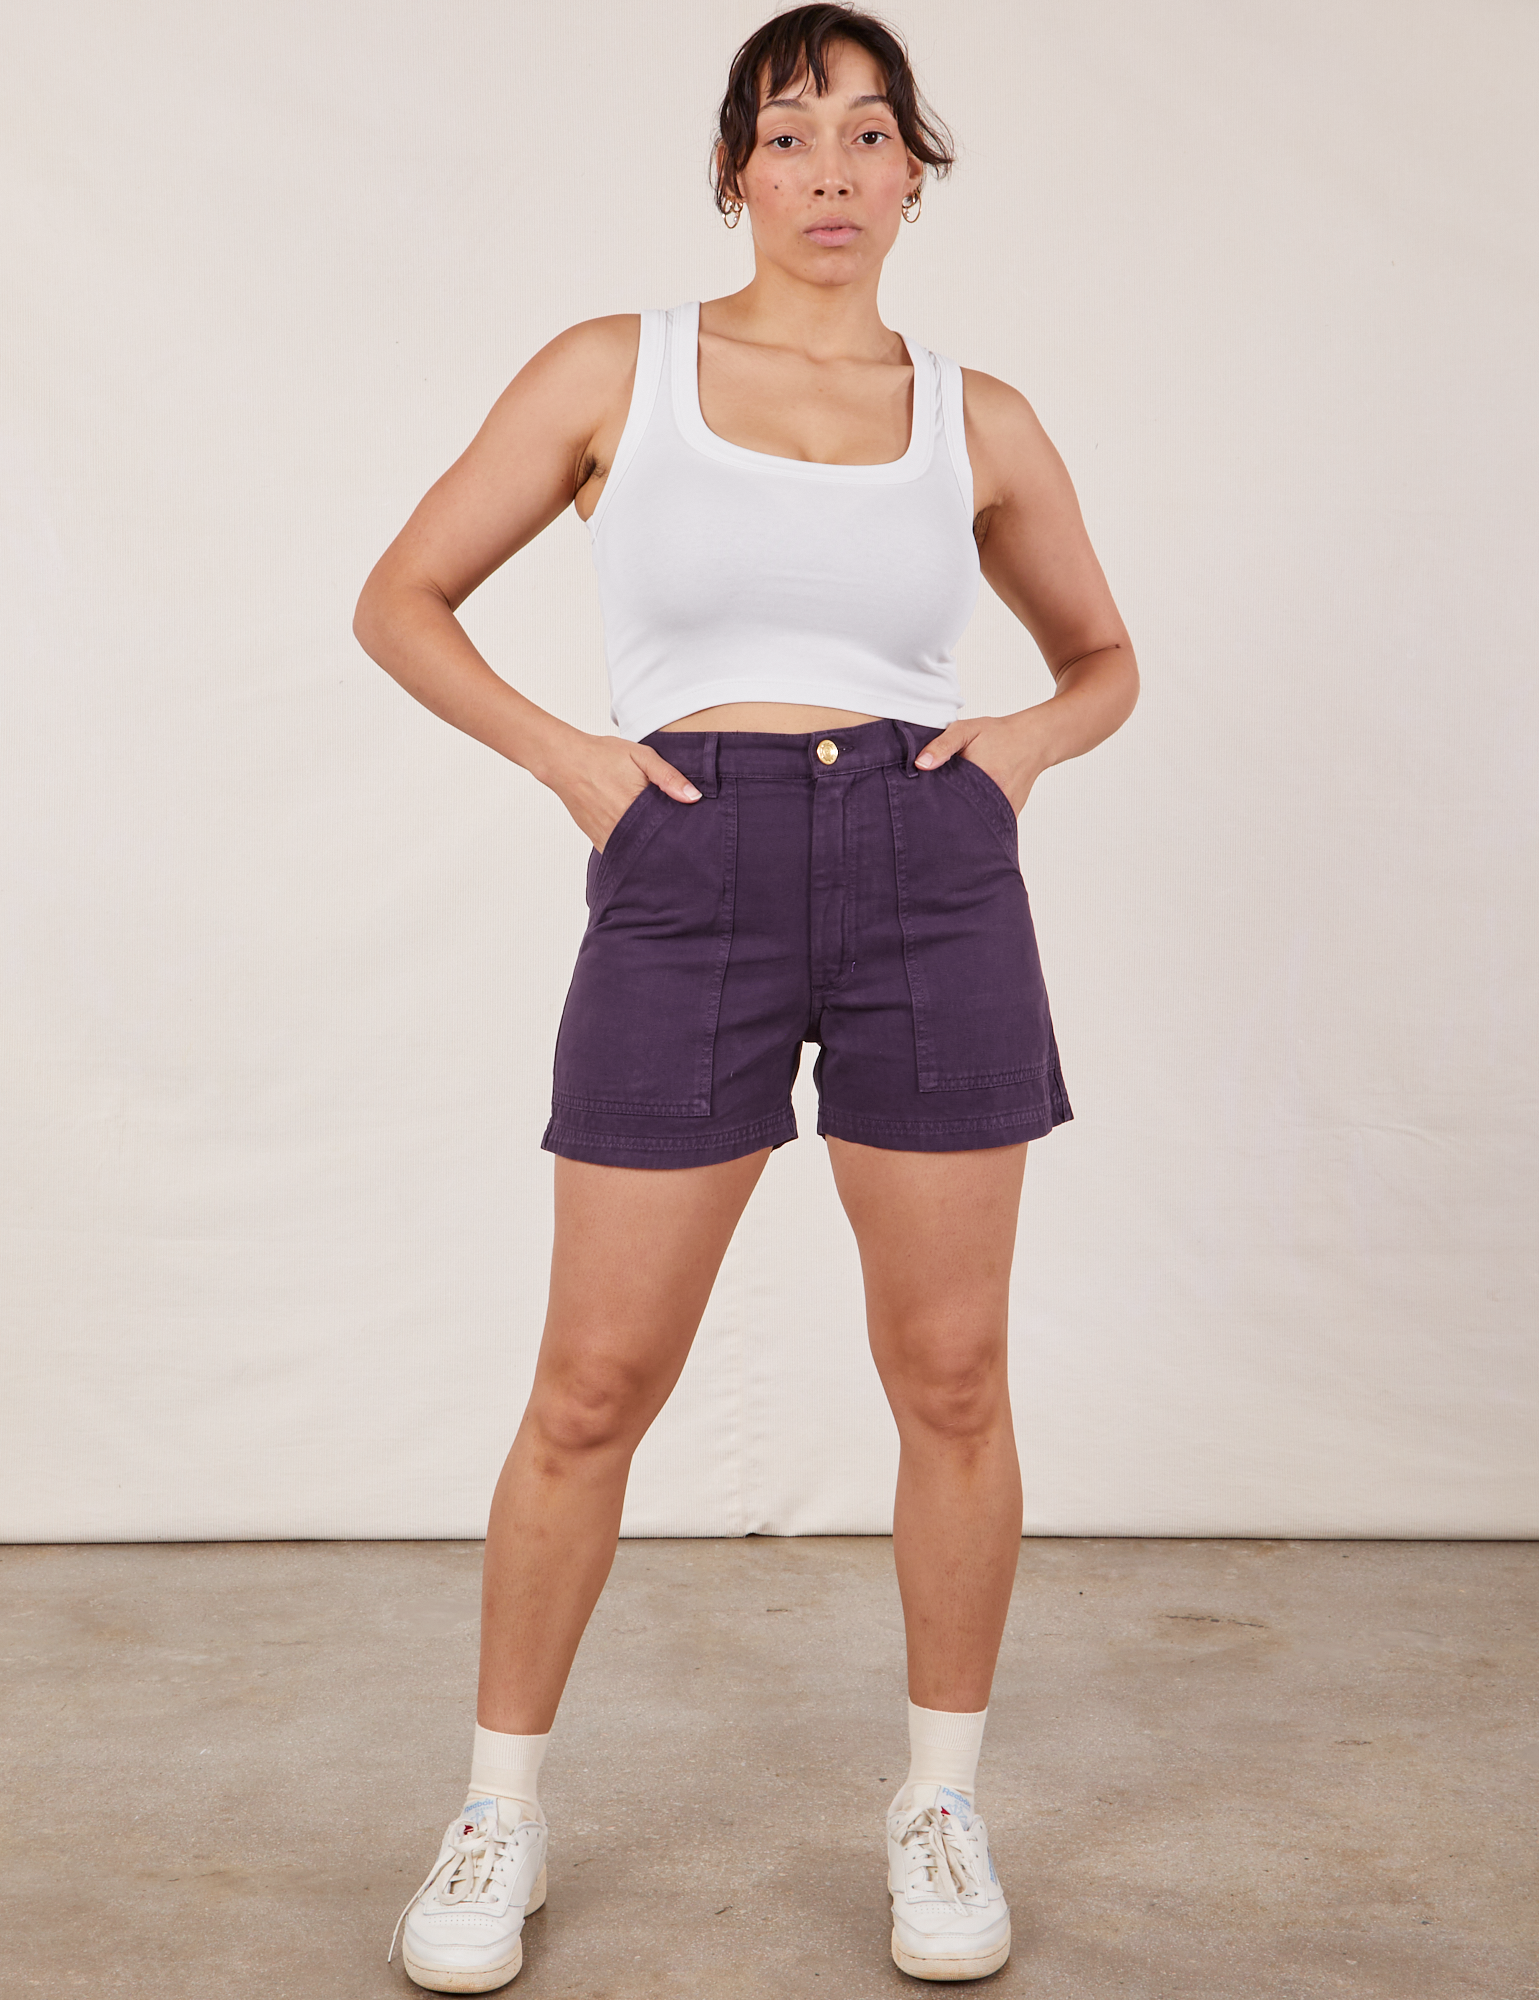 Tiara is 5’4” and wearing S Classic Work Shorts in Nebula Purple paired with Cropped Tank Top in vintage tee off-white